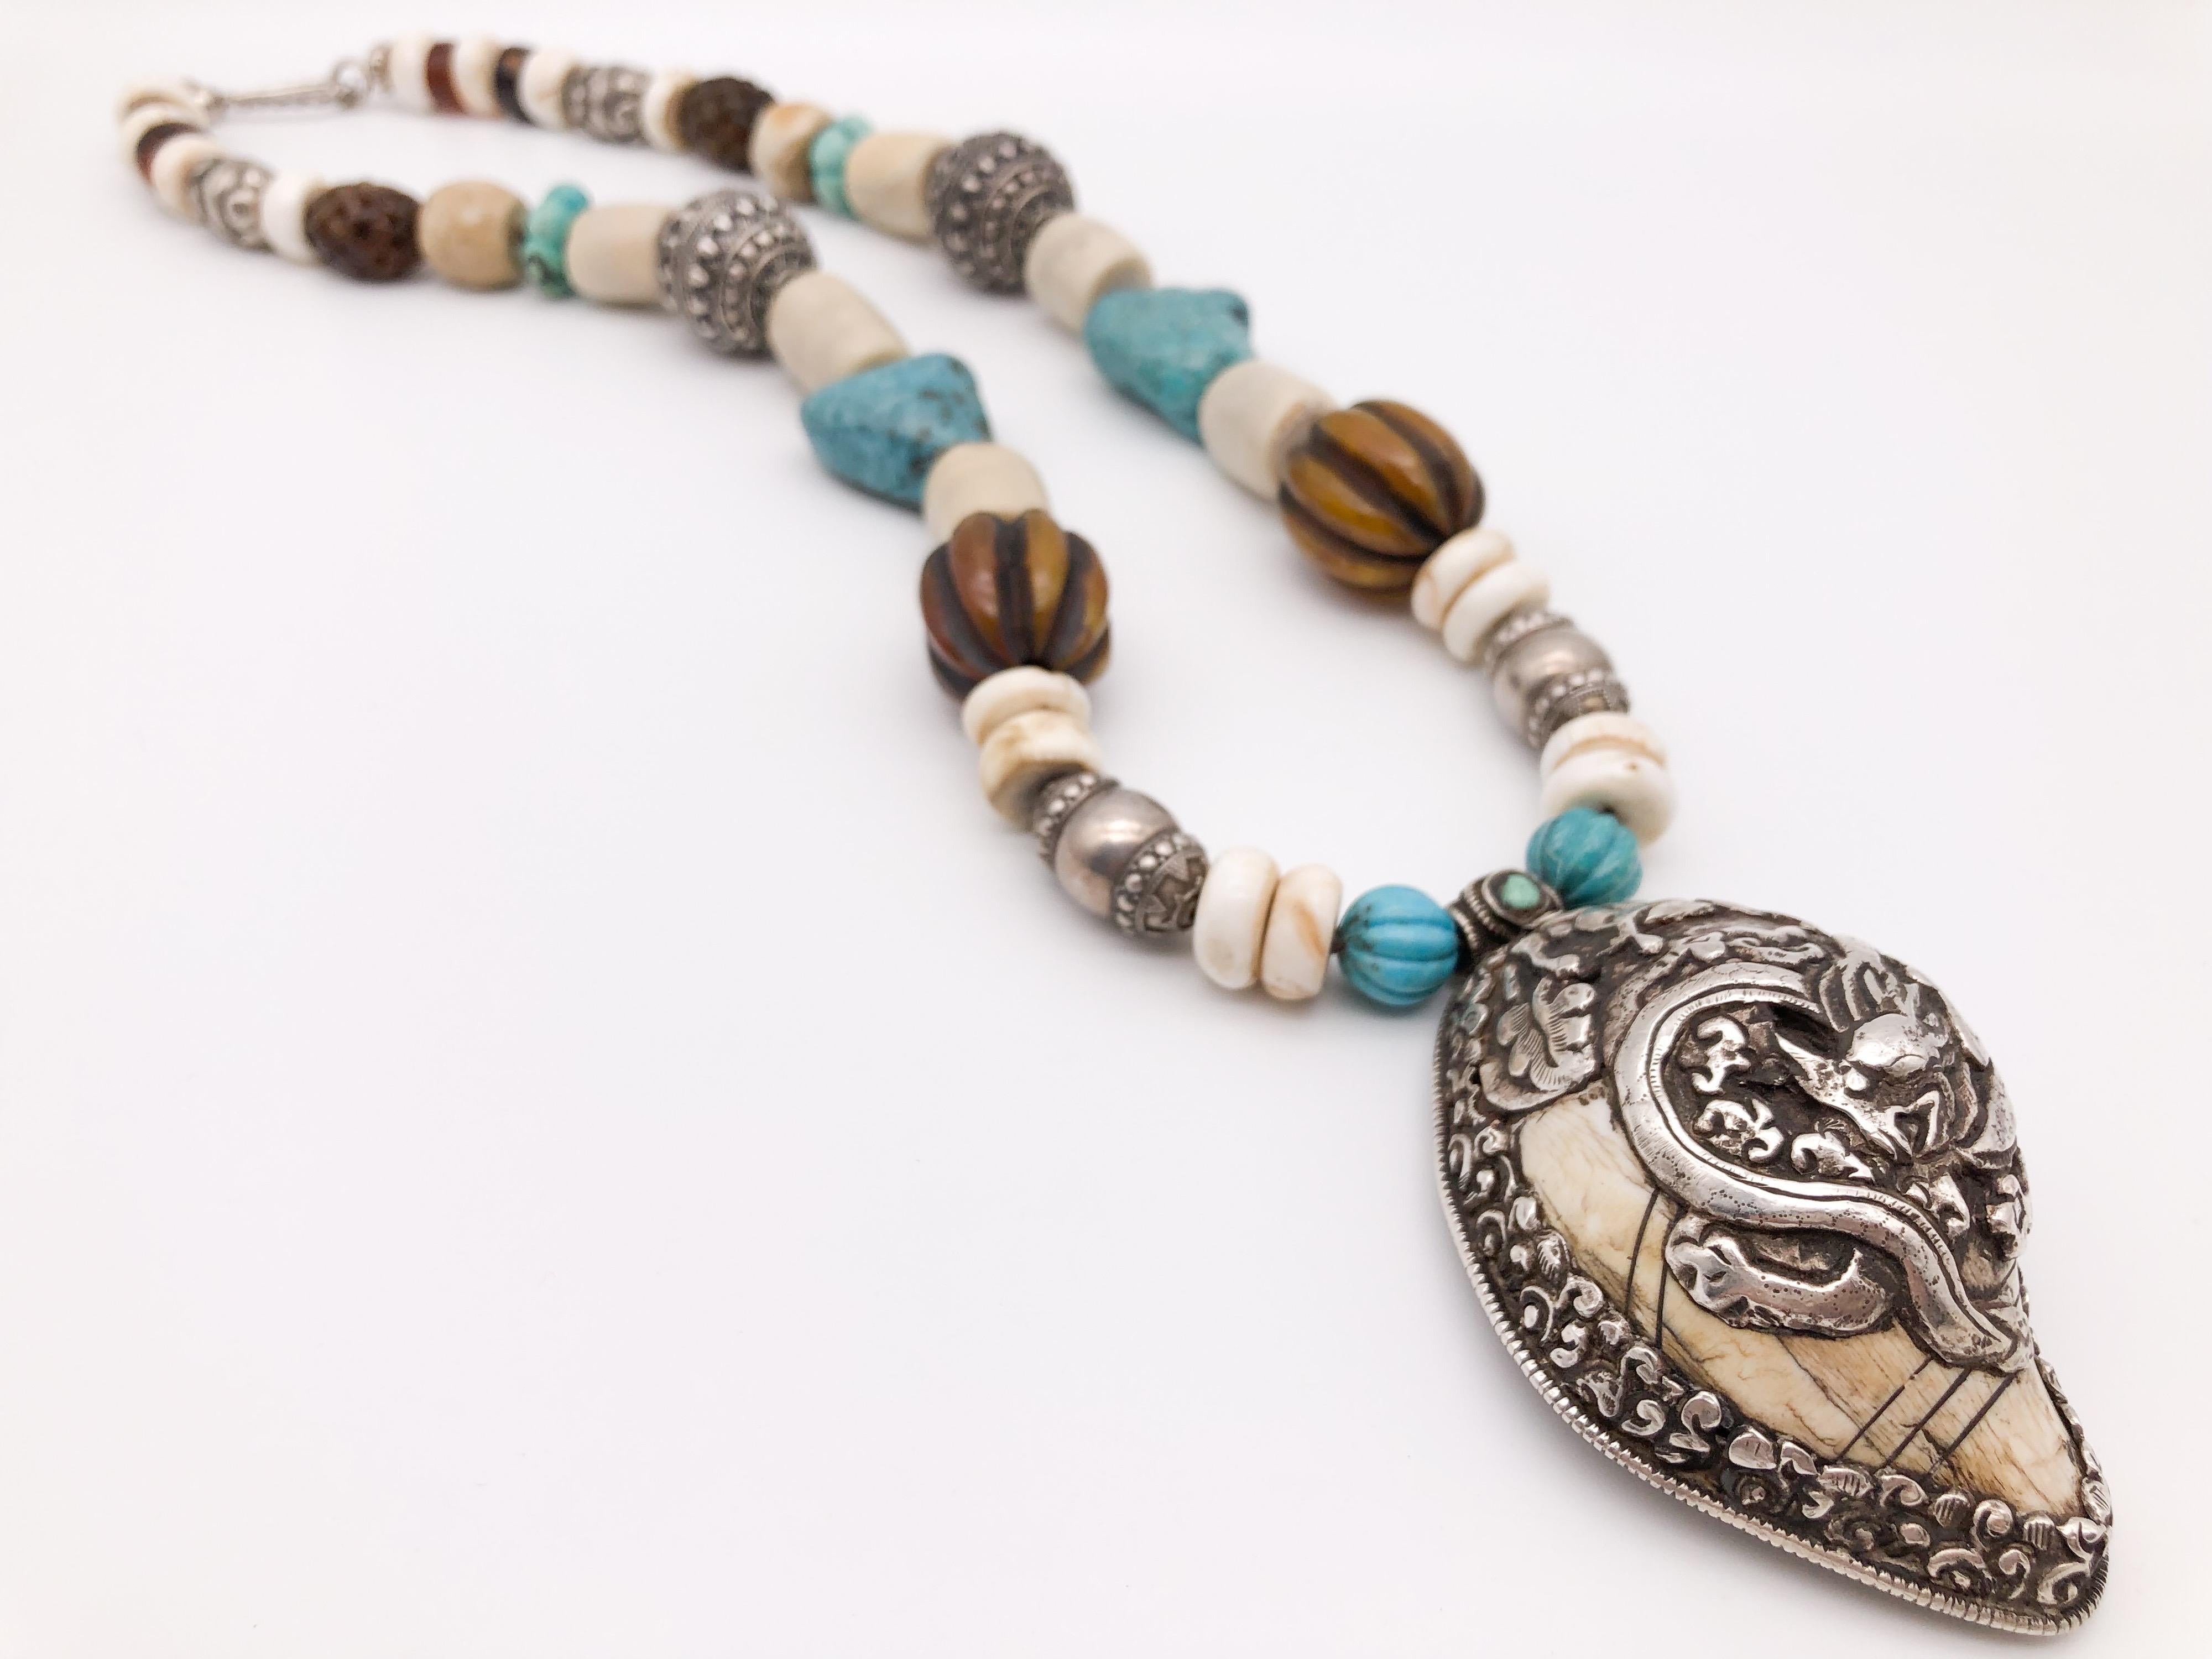 One-of-a-Kind
This amazing Bold pendant necklace is truly exquisite! 
 It features an intricate Dragon carved design on a beautiful bone and Sterling Silver pendant from Tibet. 